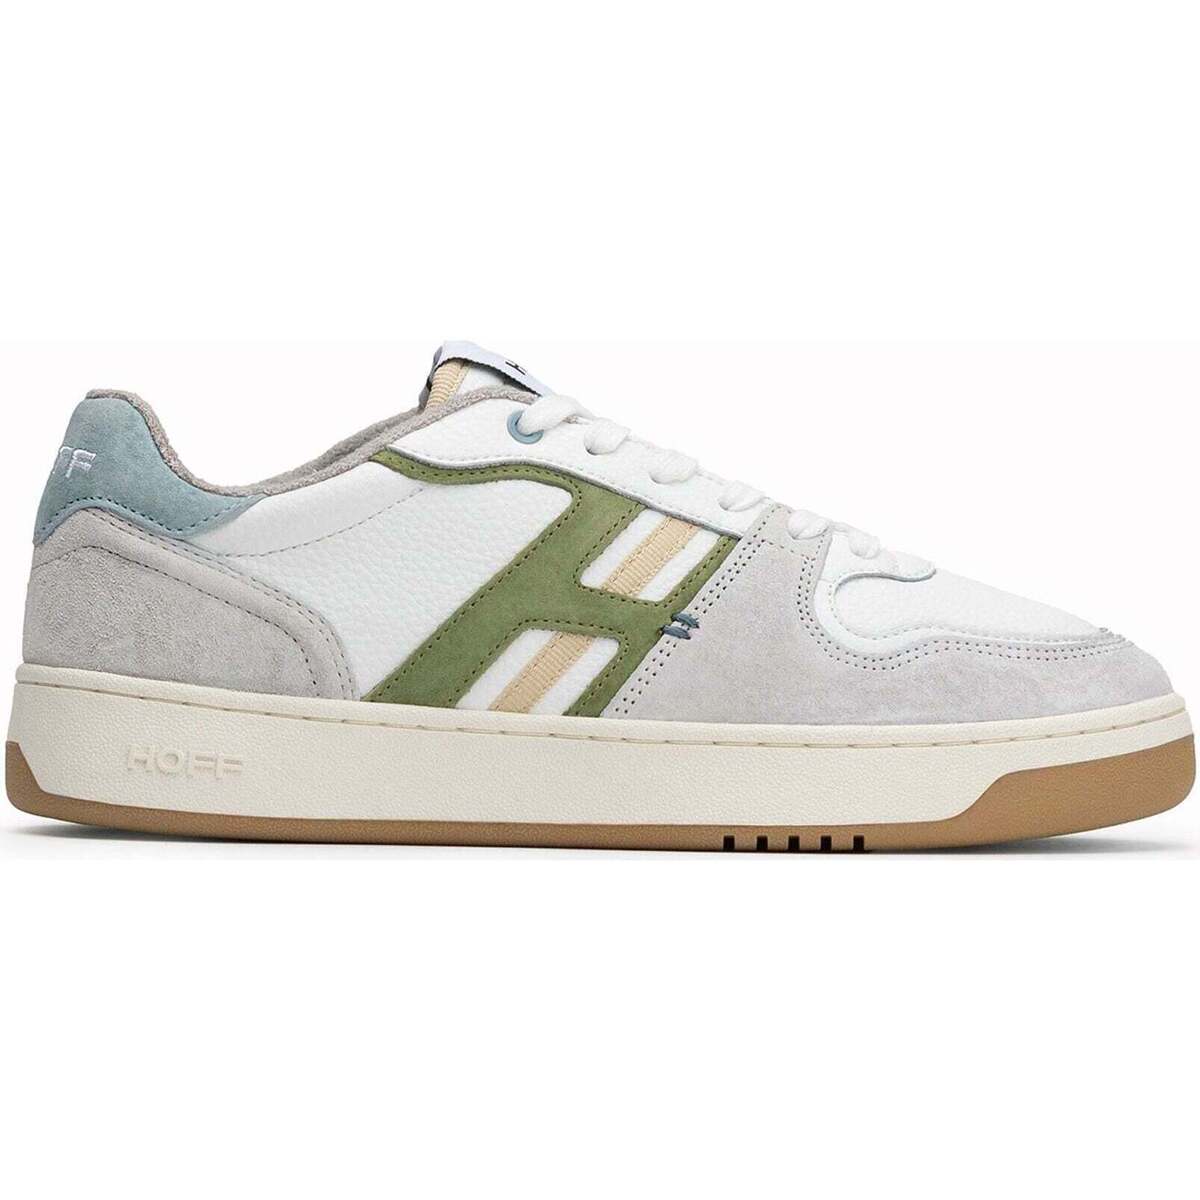 HOFF Multicolore Chaussures CAIROLI pour homme zhWmiWIy